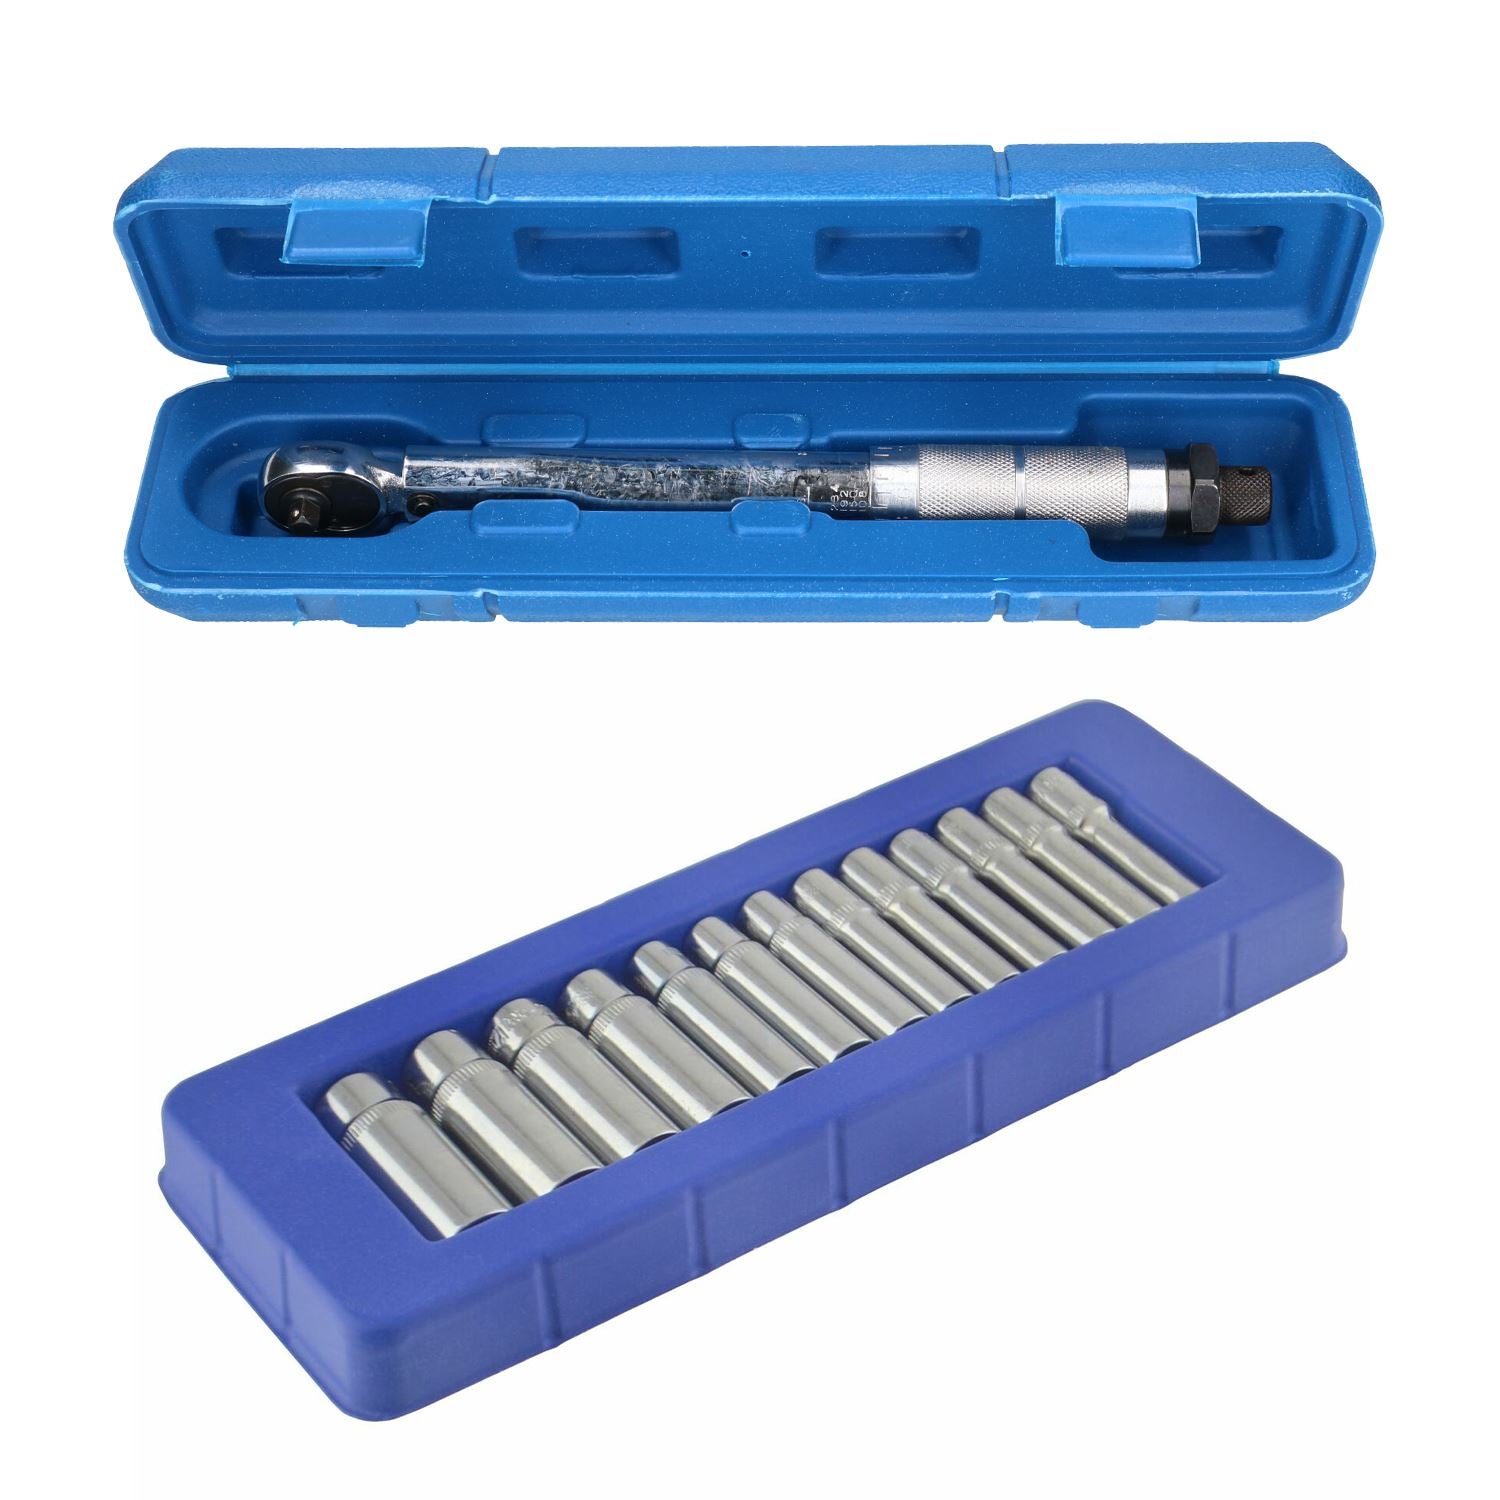 1/4" Drive Torque Wrenches